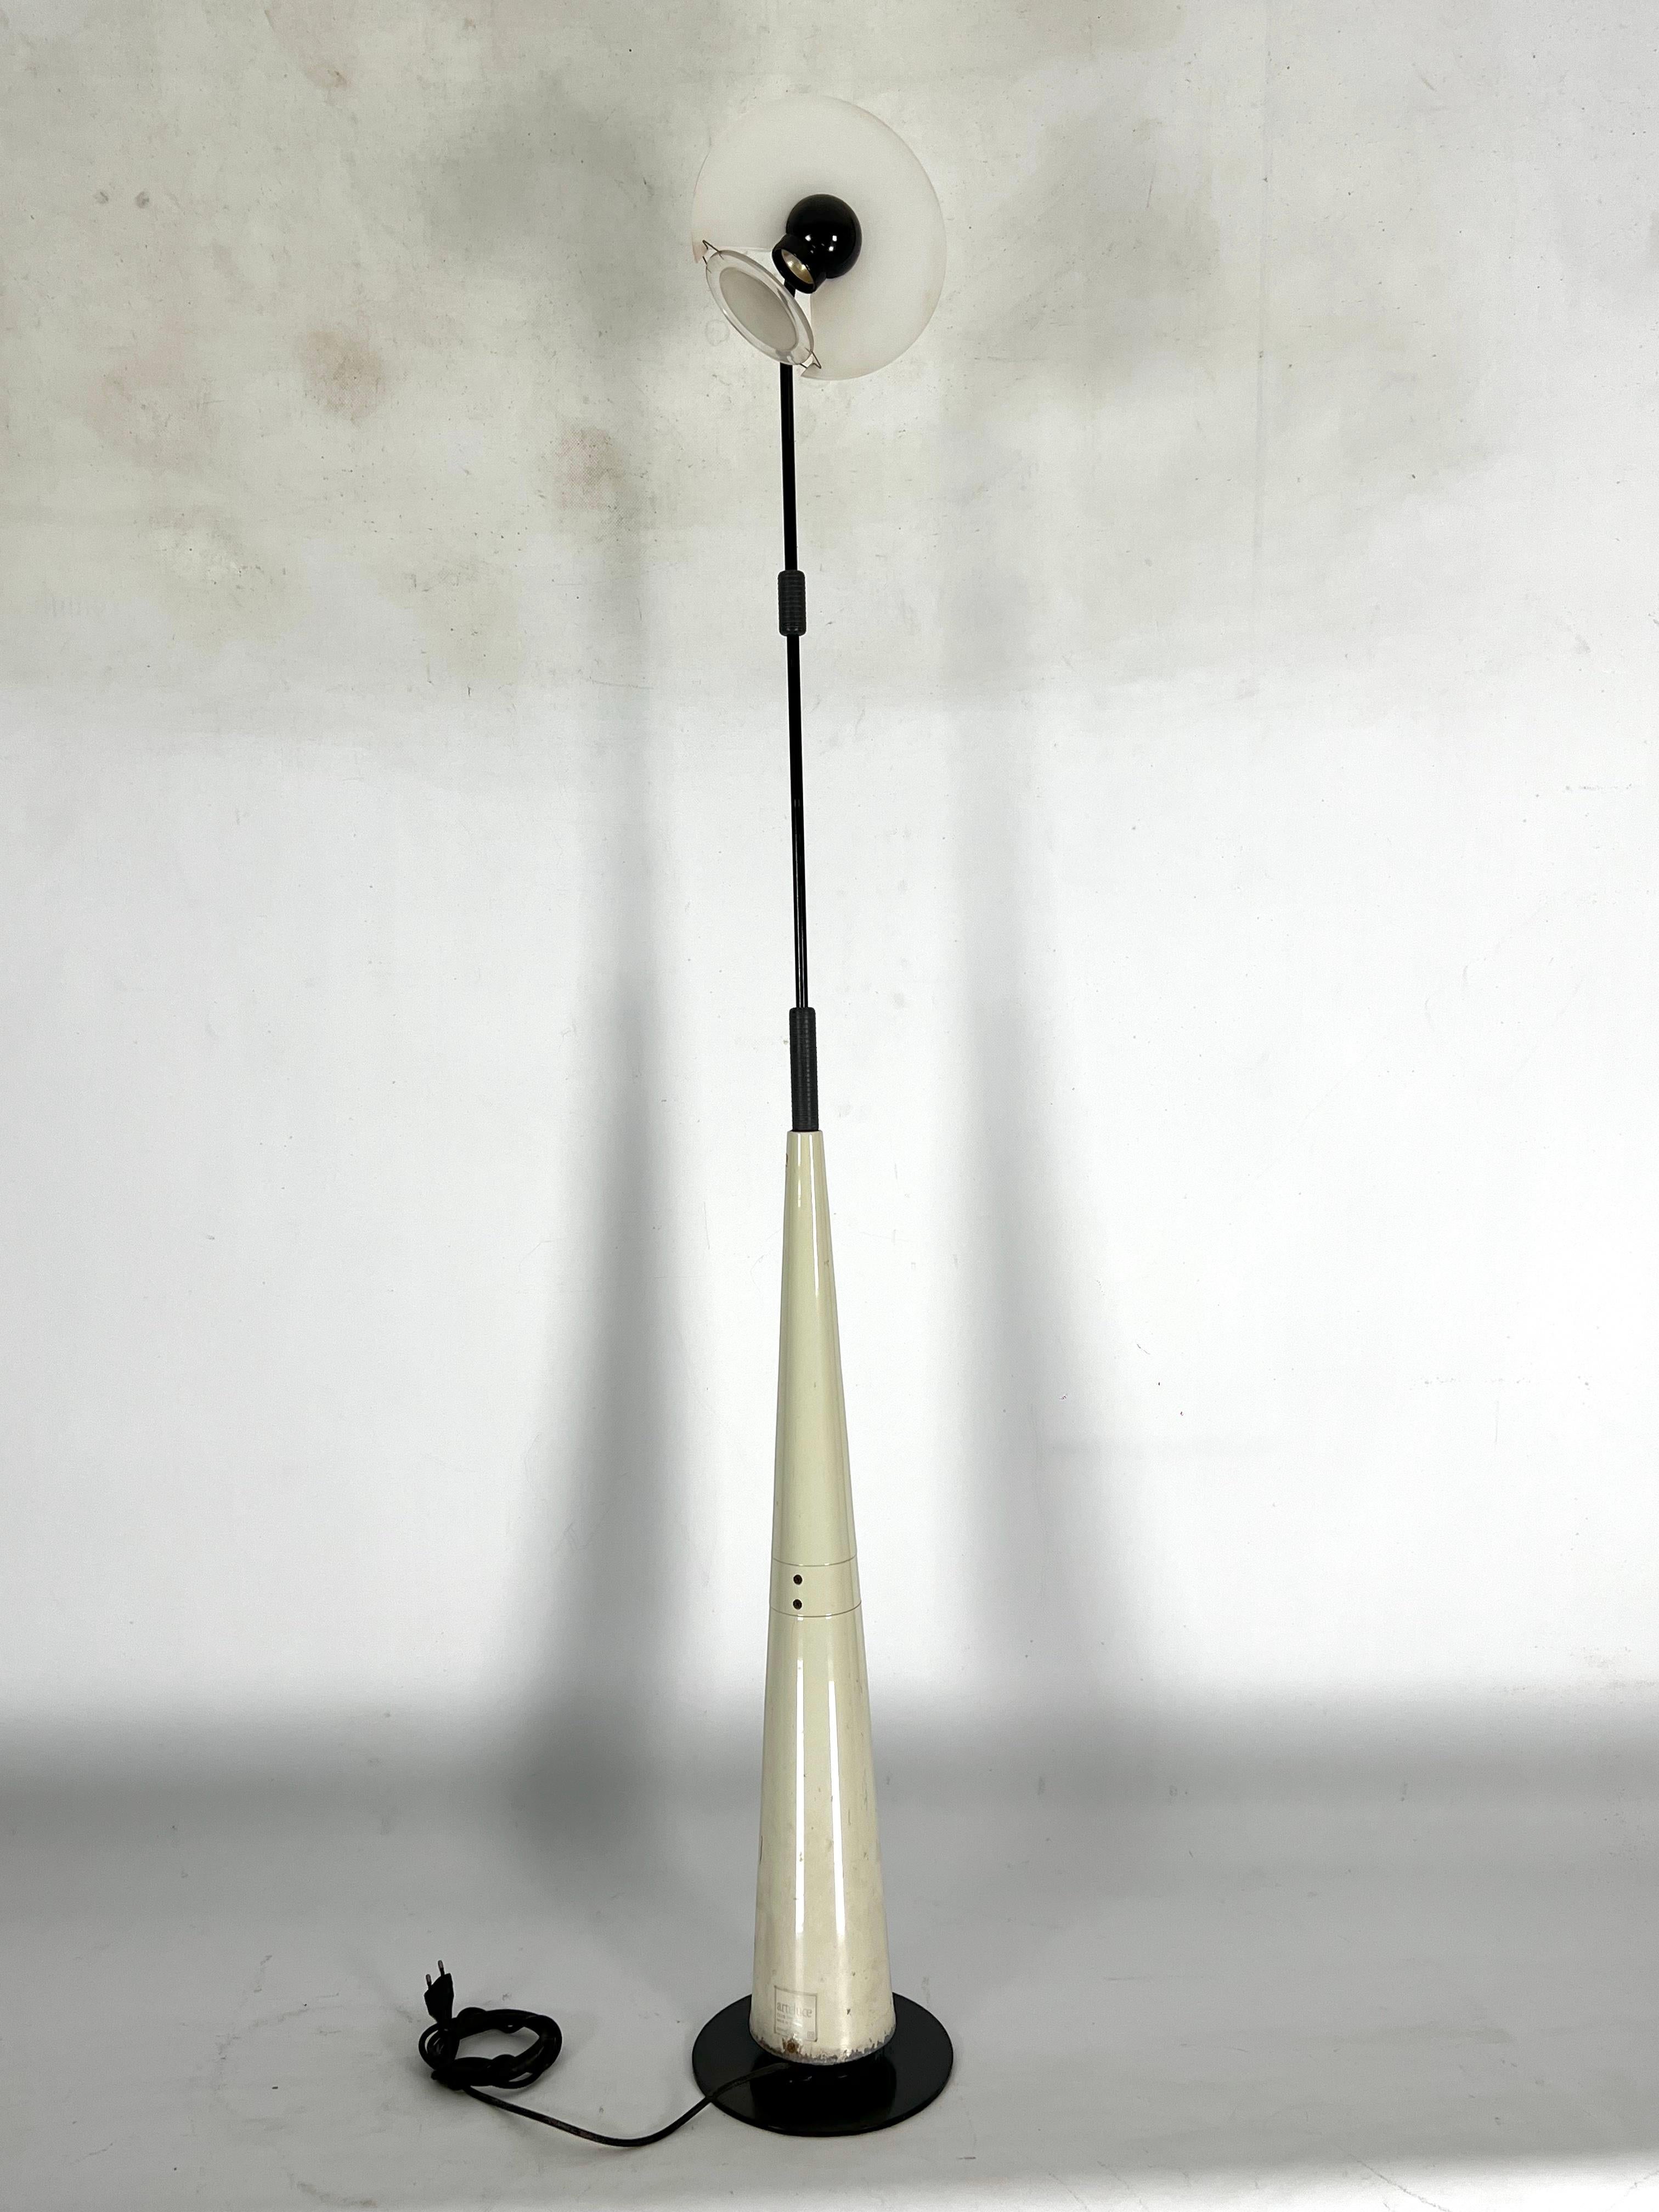 Adjustable floor lamp model Club 1195, designed by Giuseppe Ramella for Arteluce and produced in Italy during the 80s. Fair vintage condition with trace of age and use. Some lack of lacquer. Glass with no chips or cracks. Full working with EU